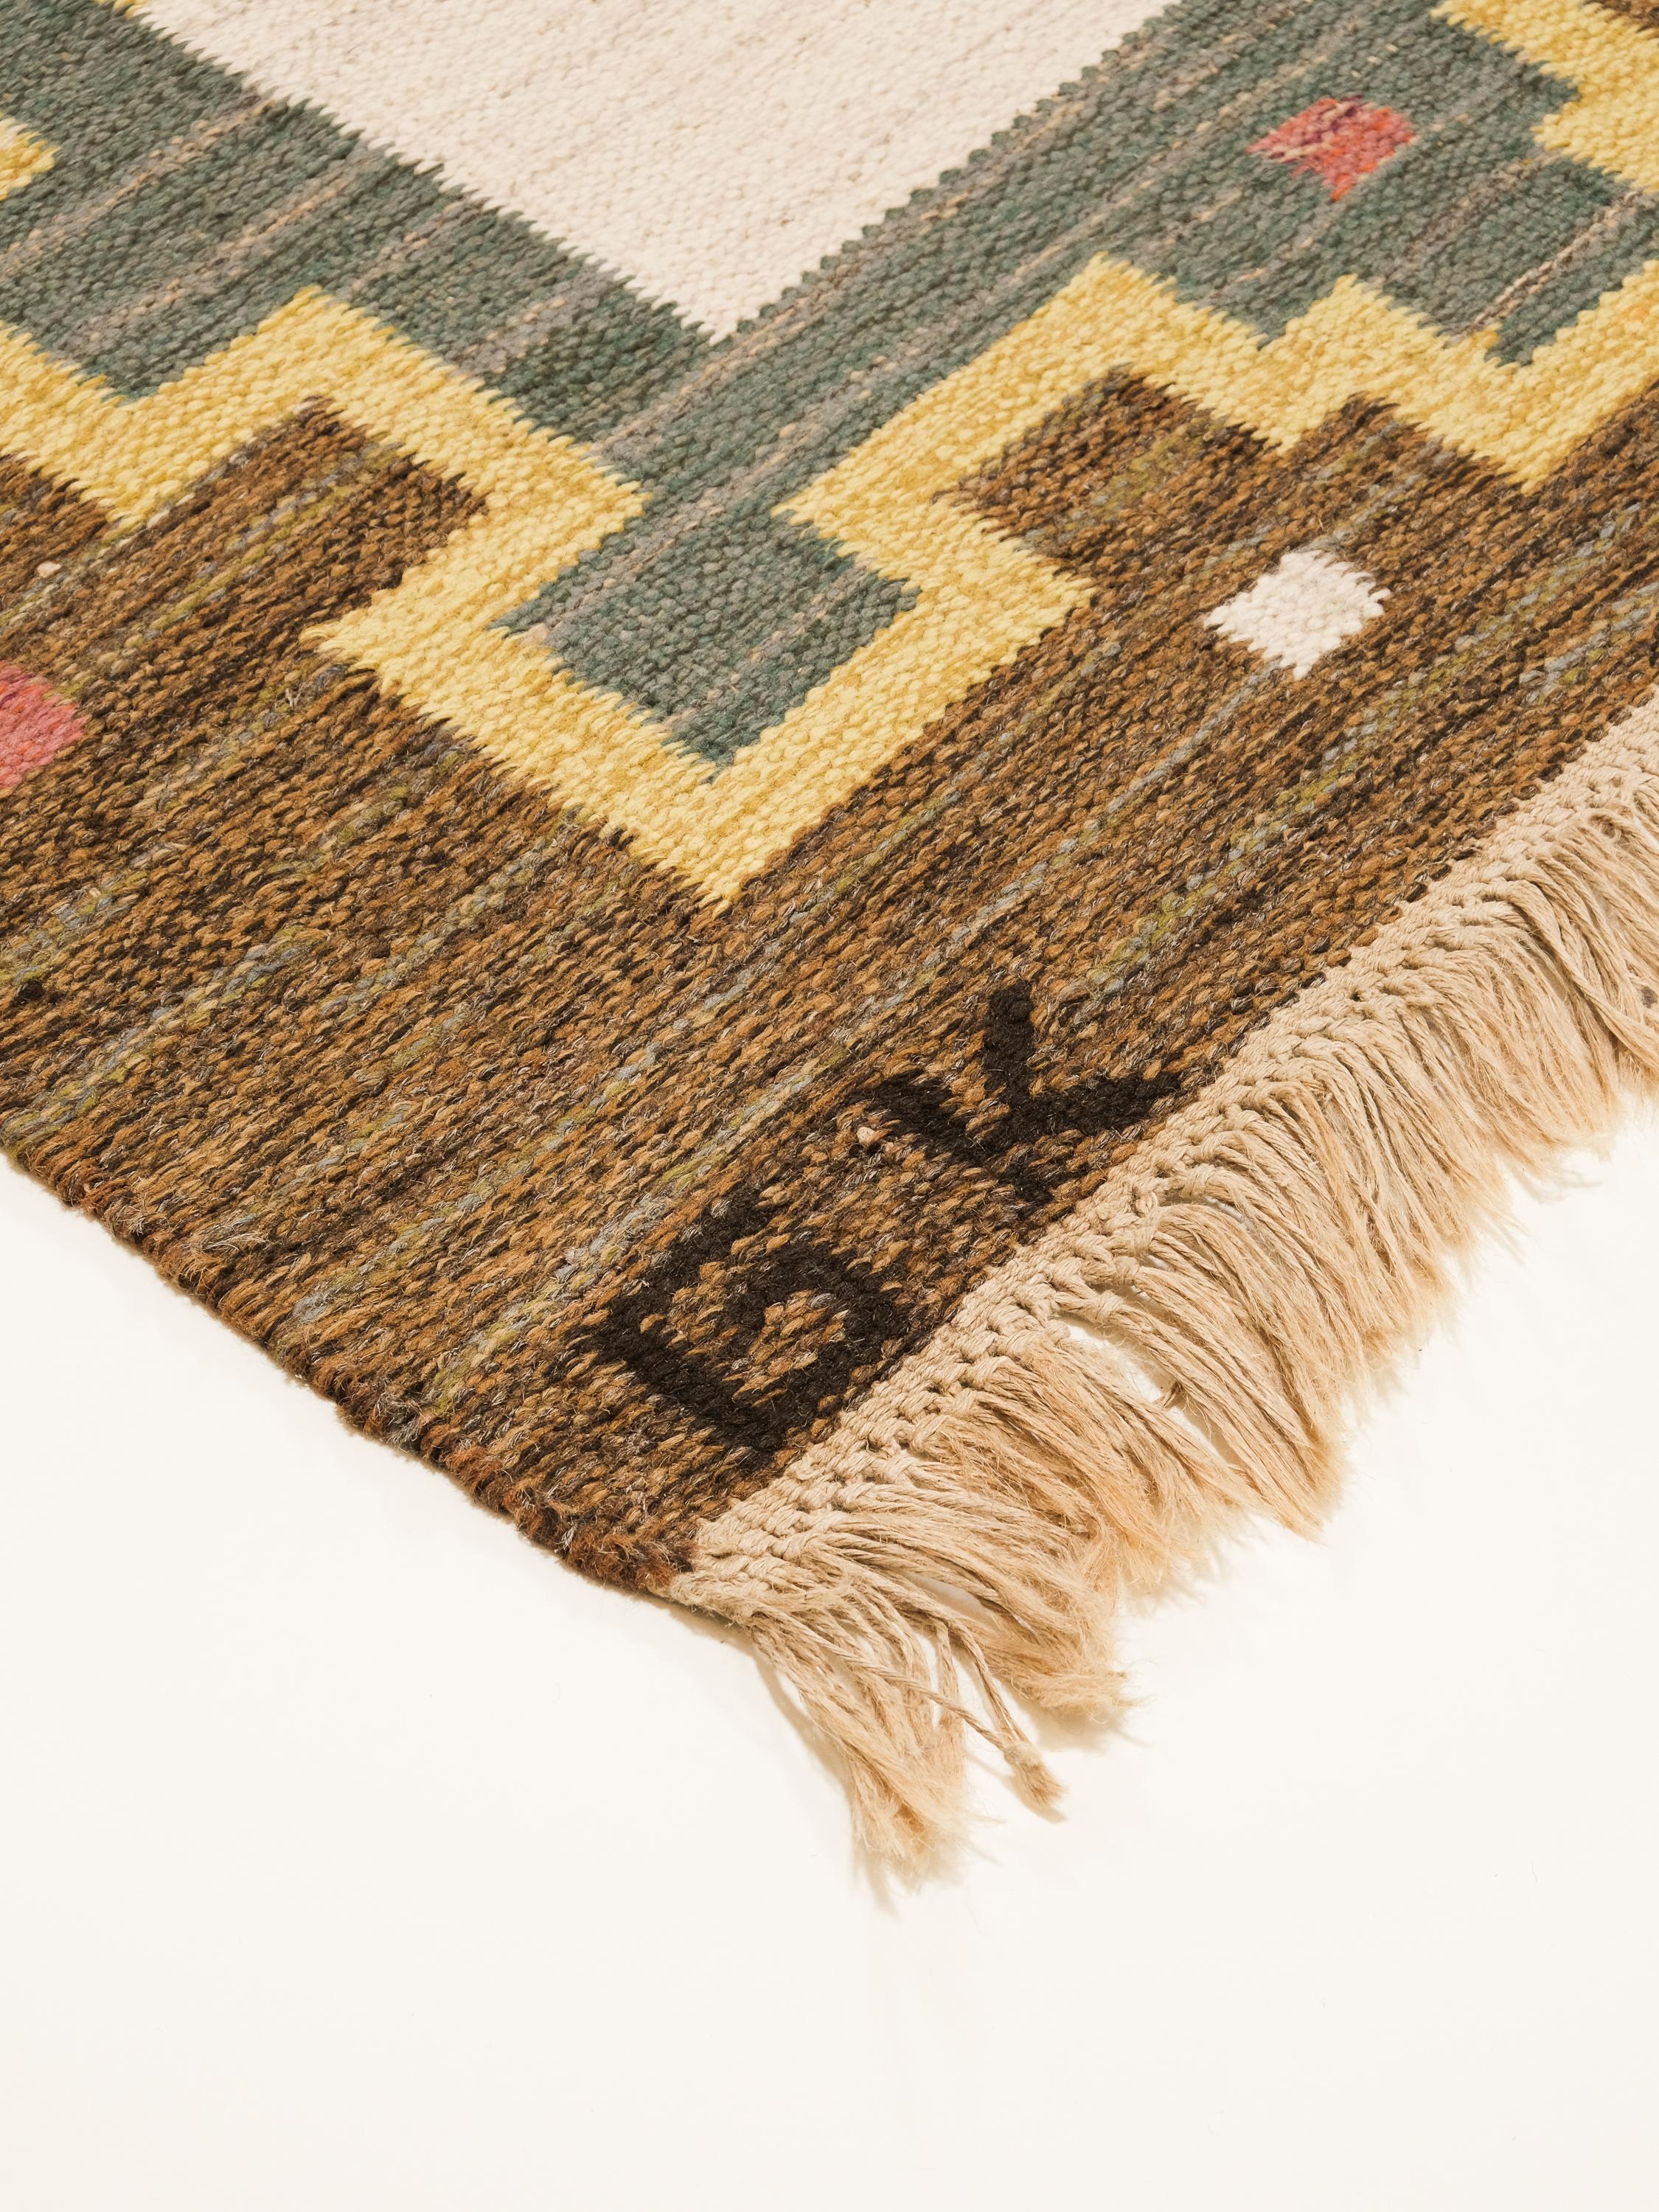 This Swedish kilim rug measure 220 x 135 cm and is handmade with classic flat weave technique. Signed 